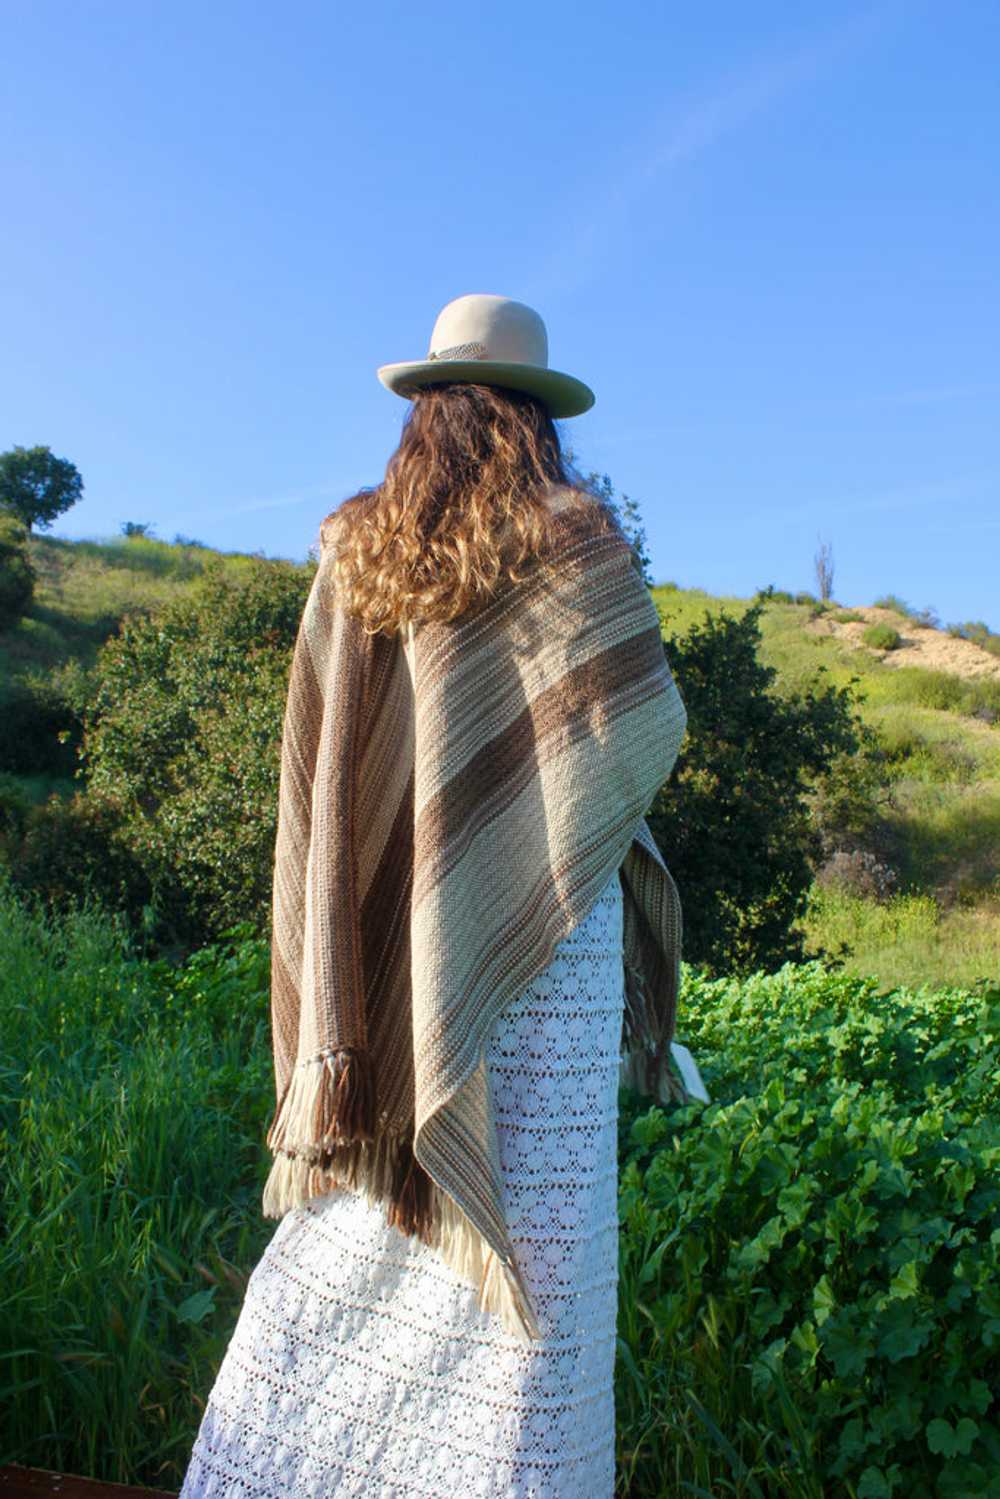 Terra Mills Handwoven Wool Shawl Wrap New Mexico - image 5